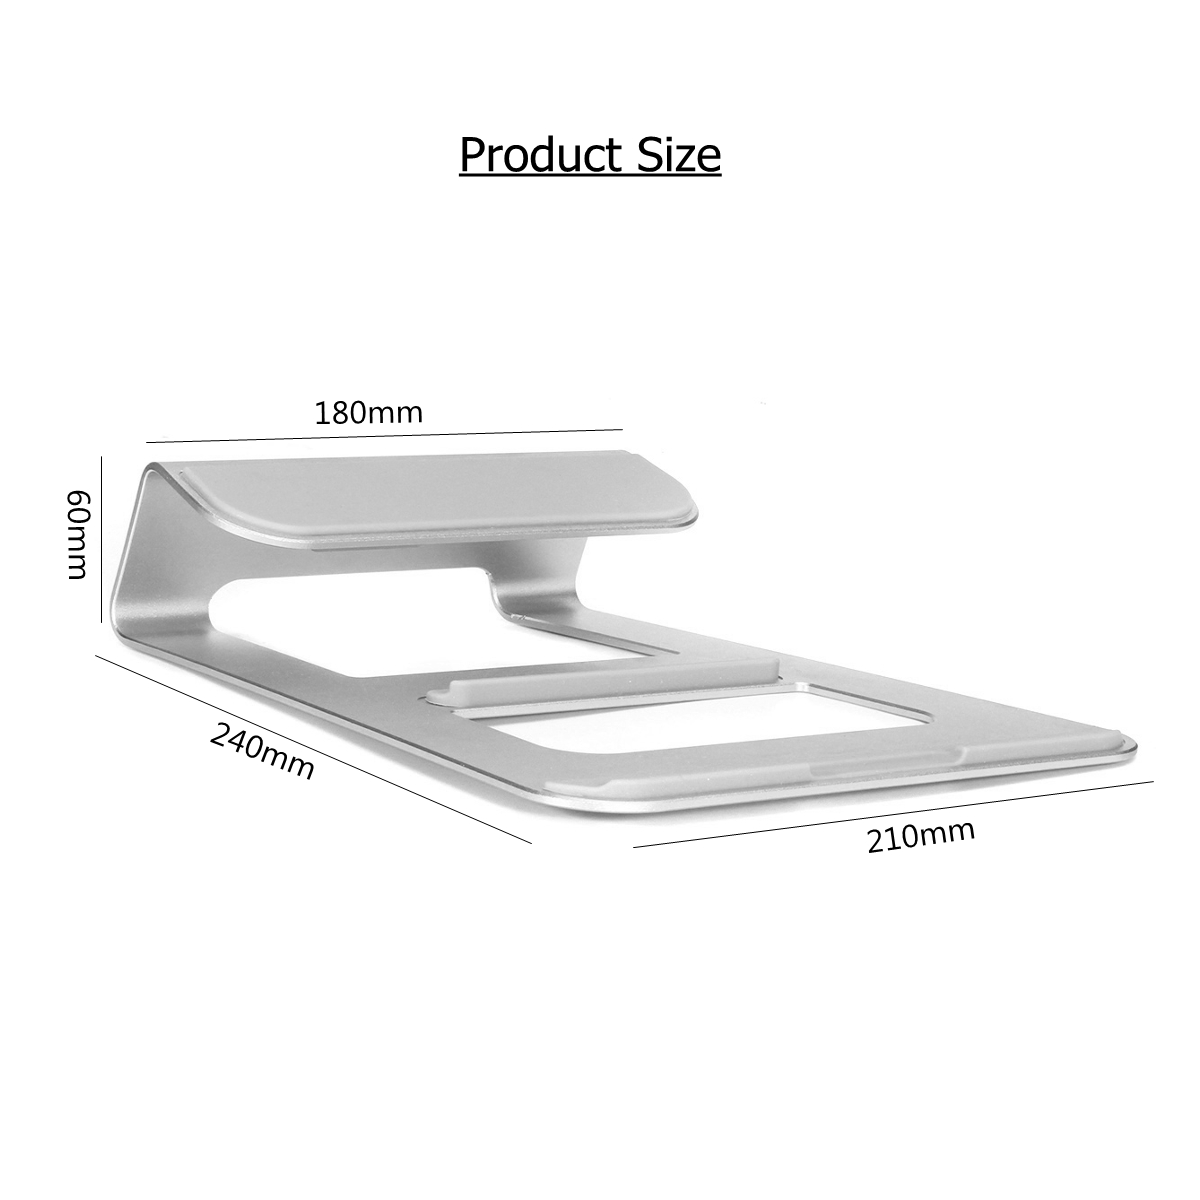 Universal-Aluminum-Alloy-Heat-Dissipation-Laptop-Stand-Tablet-Holder-for-Macbook-iPad--iPhone-1165837-8